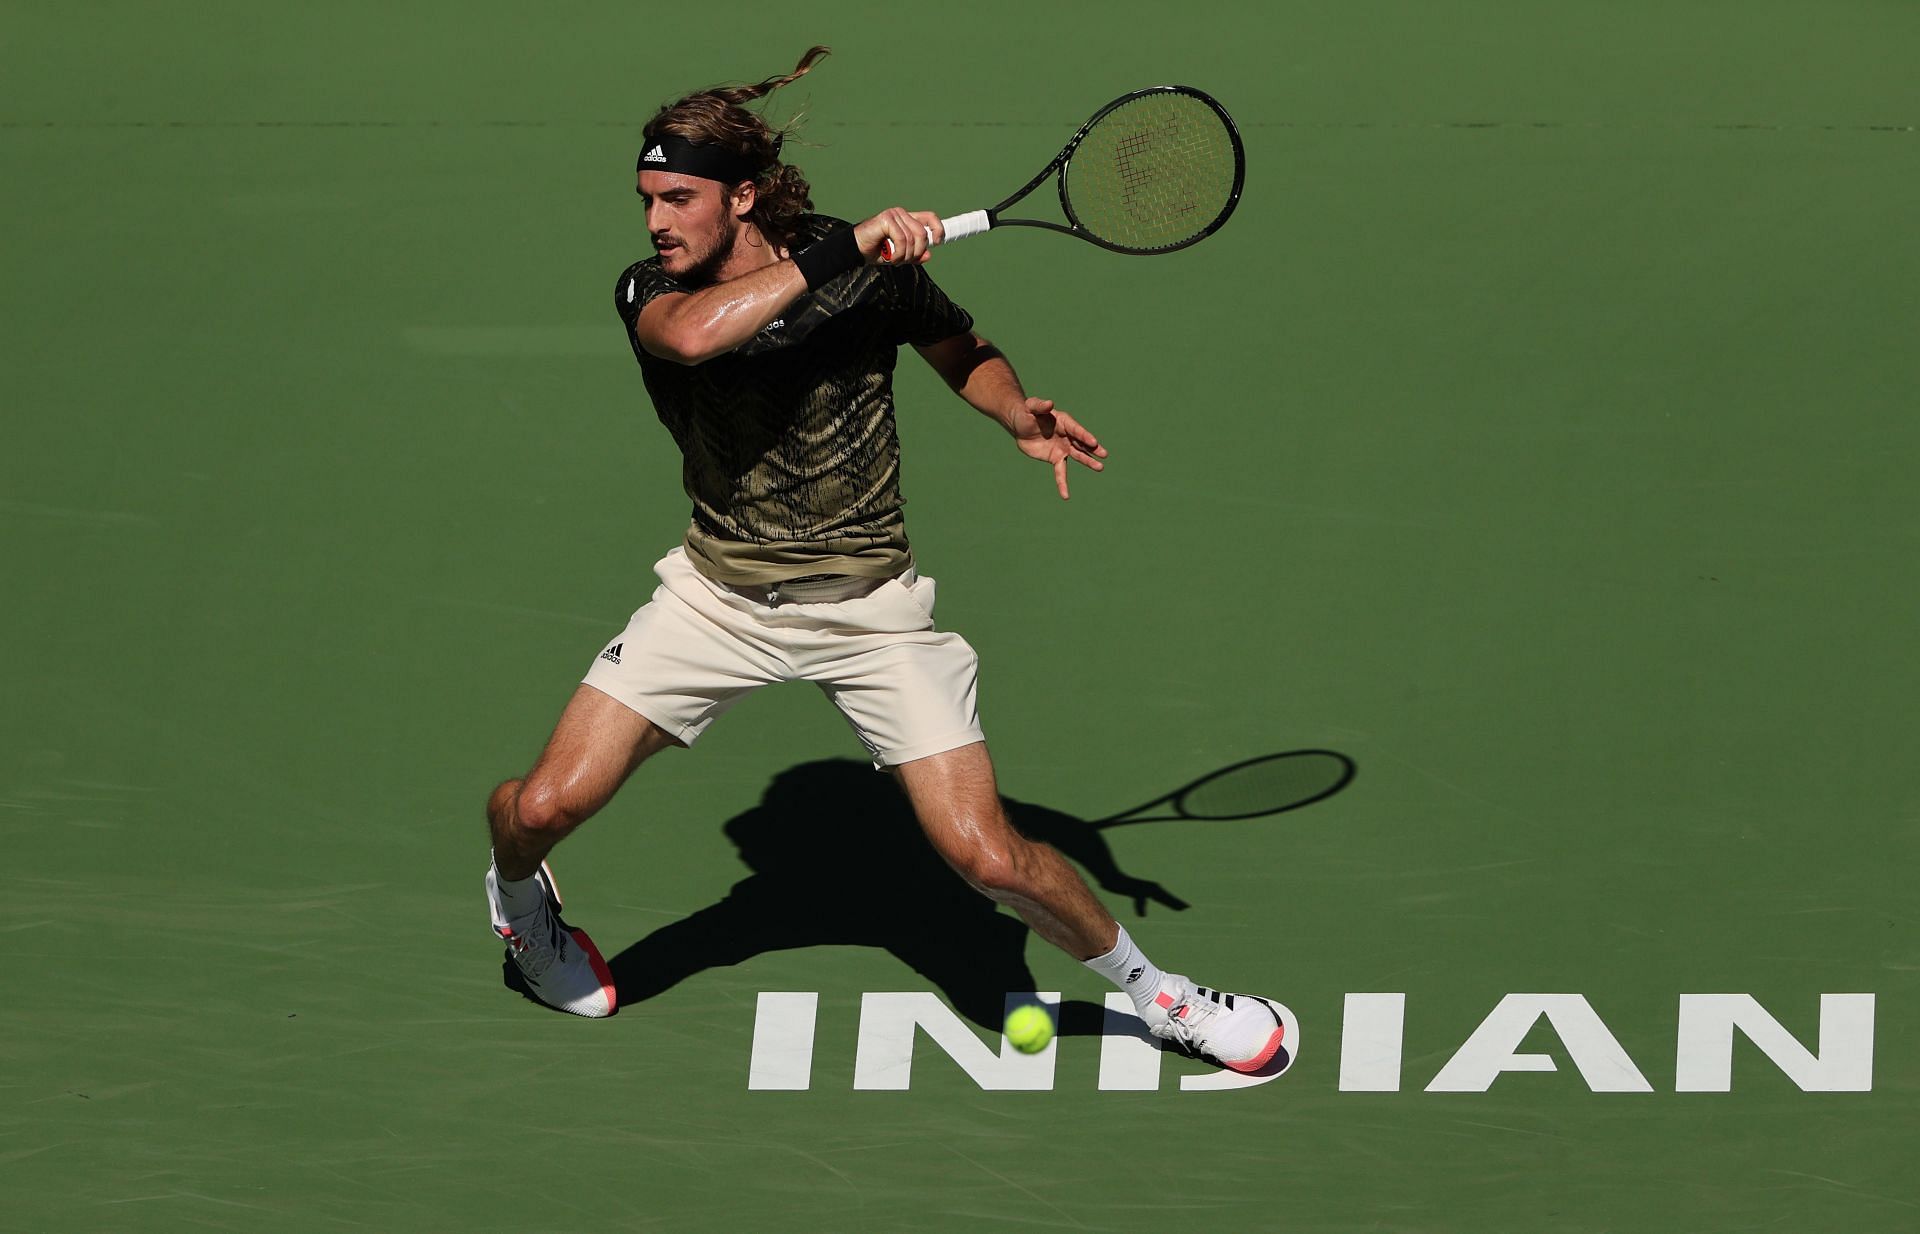 Stefanos Tsitsipas in action at the BNP Paribas Open - Day 12